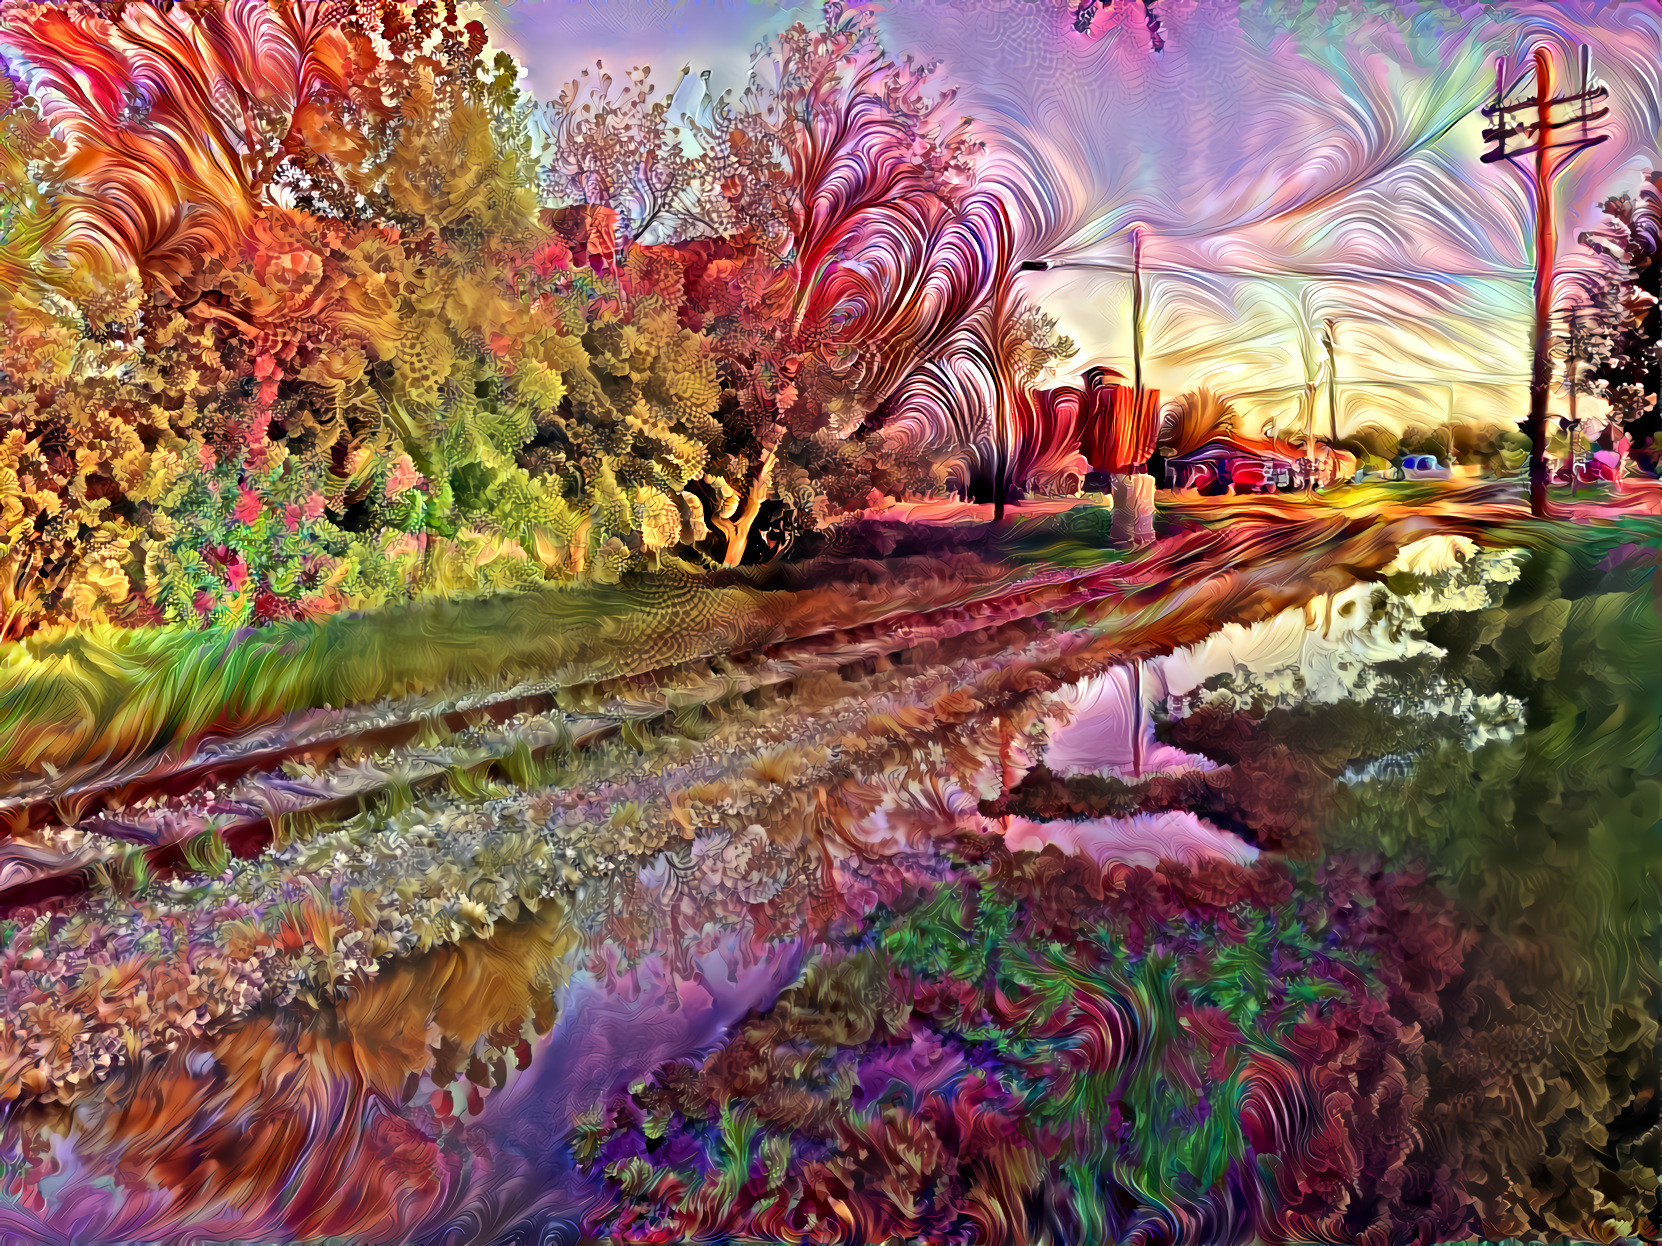 Rail-puddles fractalated